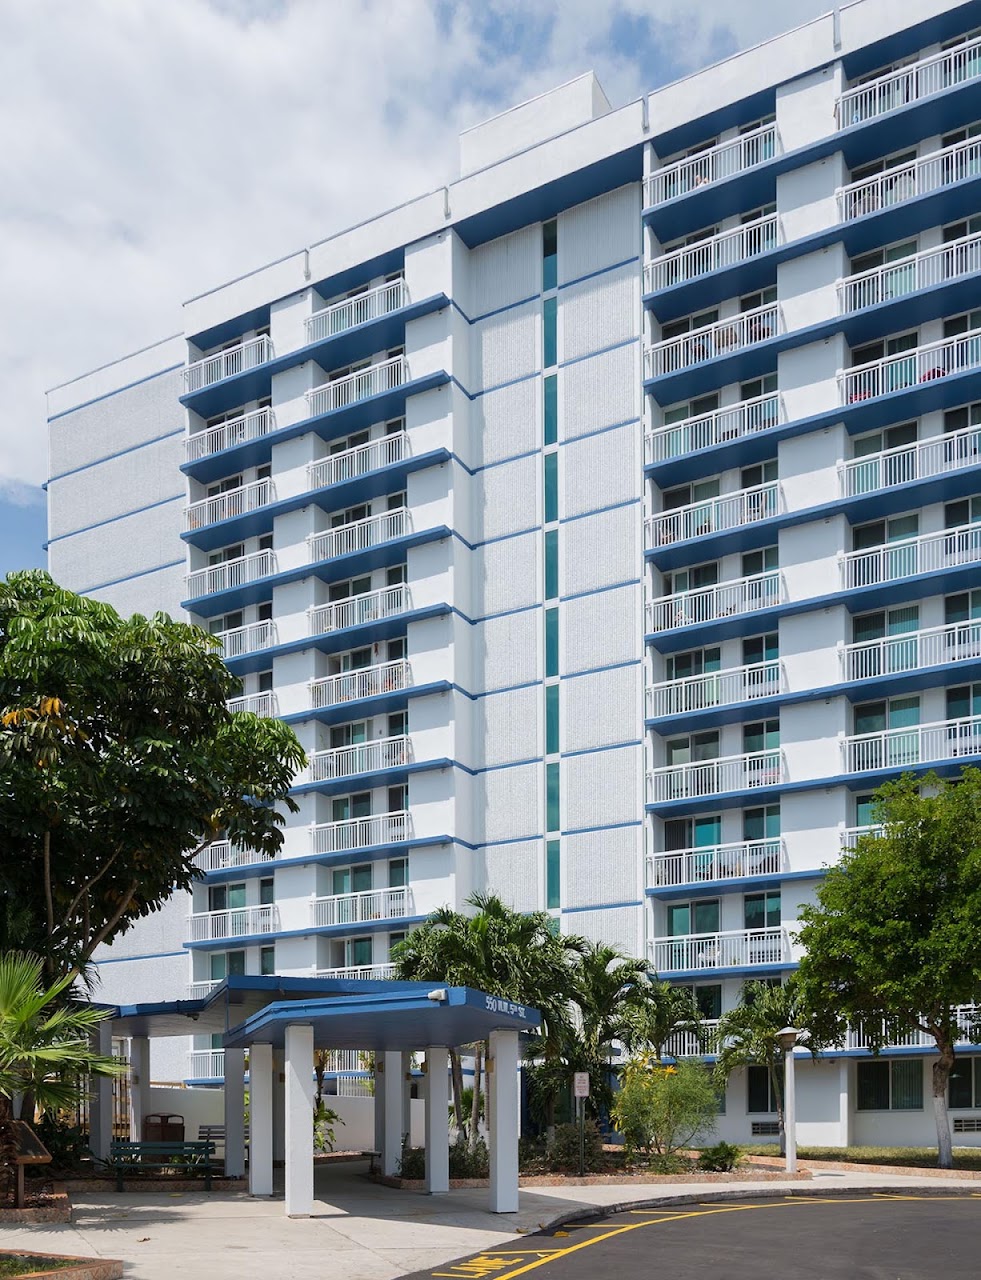 Photo of JACK ORR PLAZA I. Affordable housing located at 550 NW 5TH STREET MIAMI, FL 33128